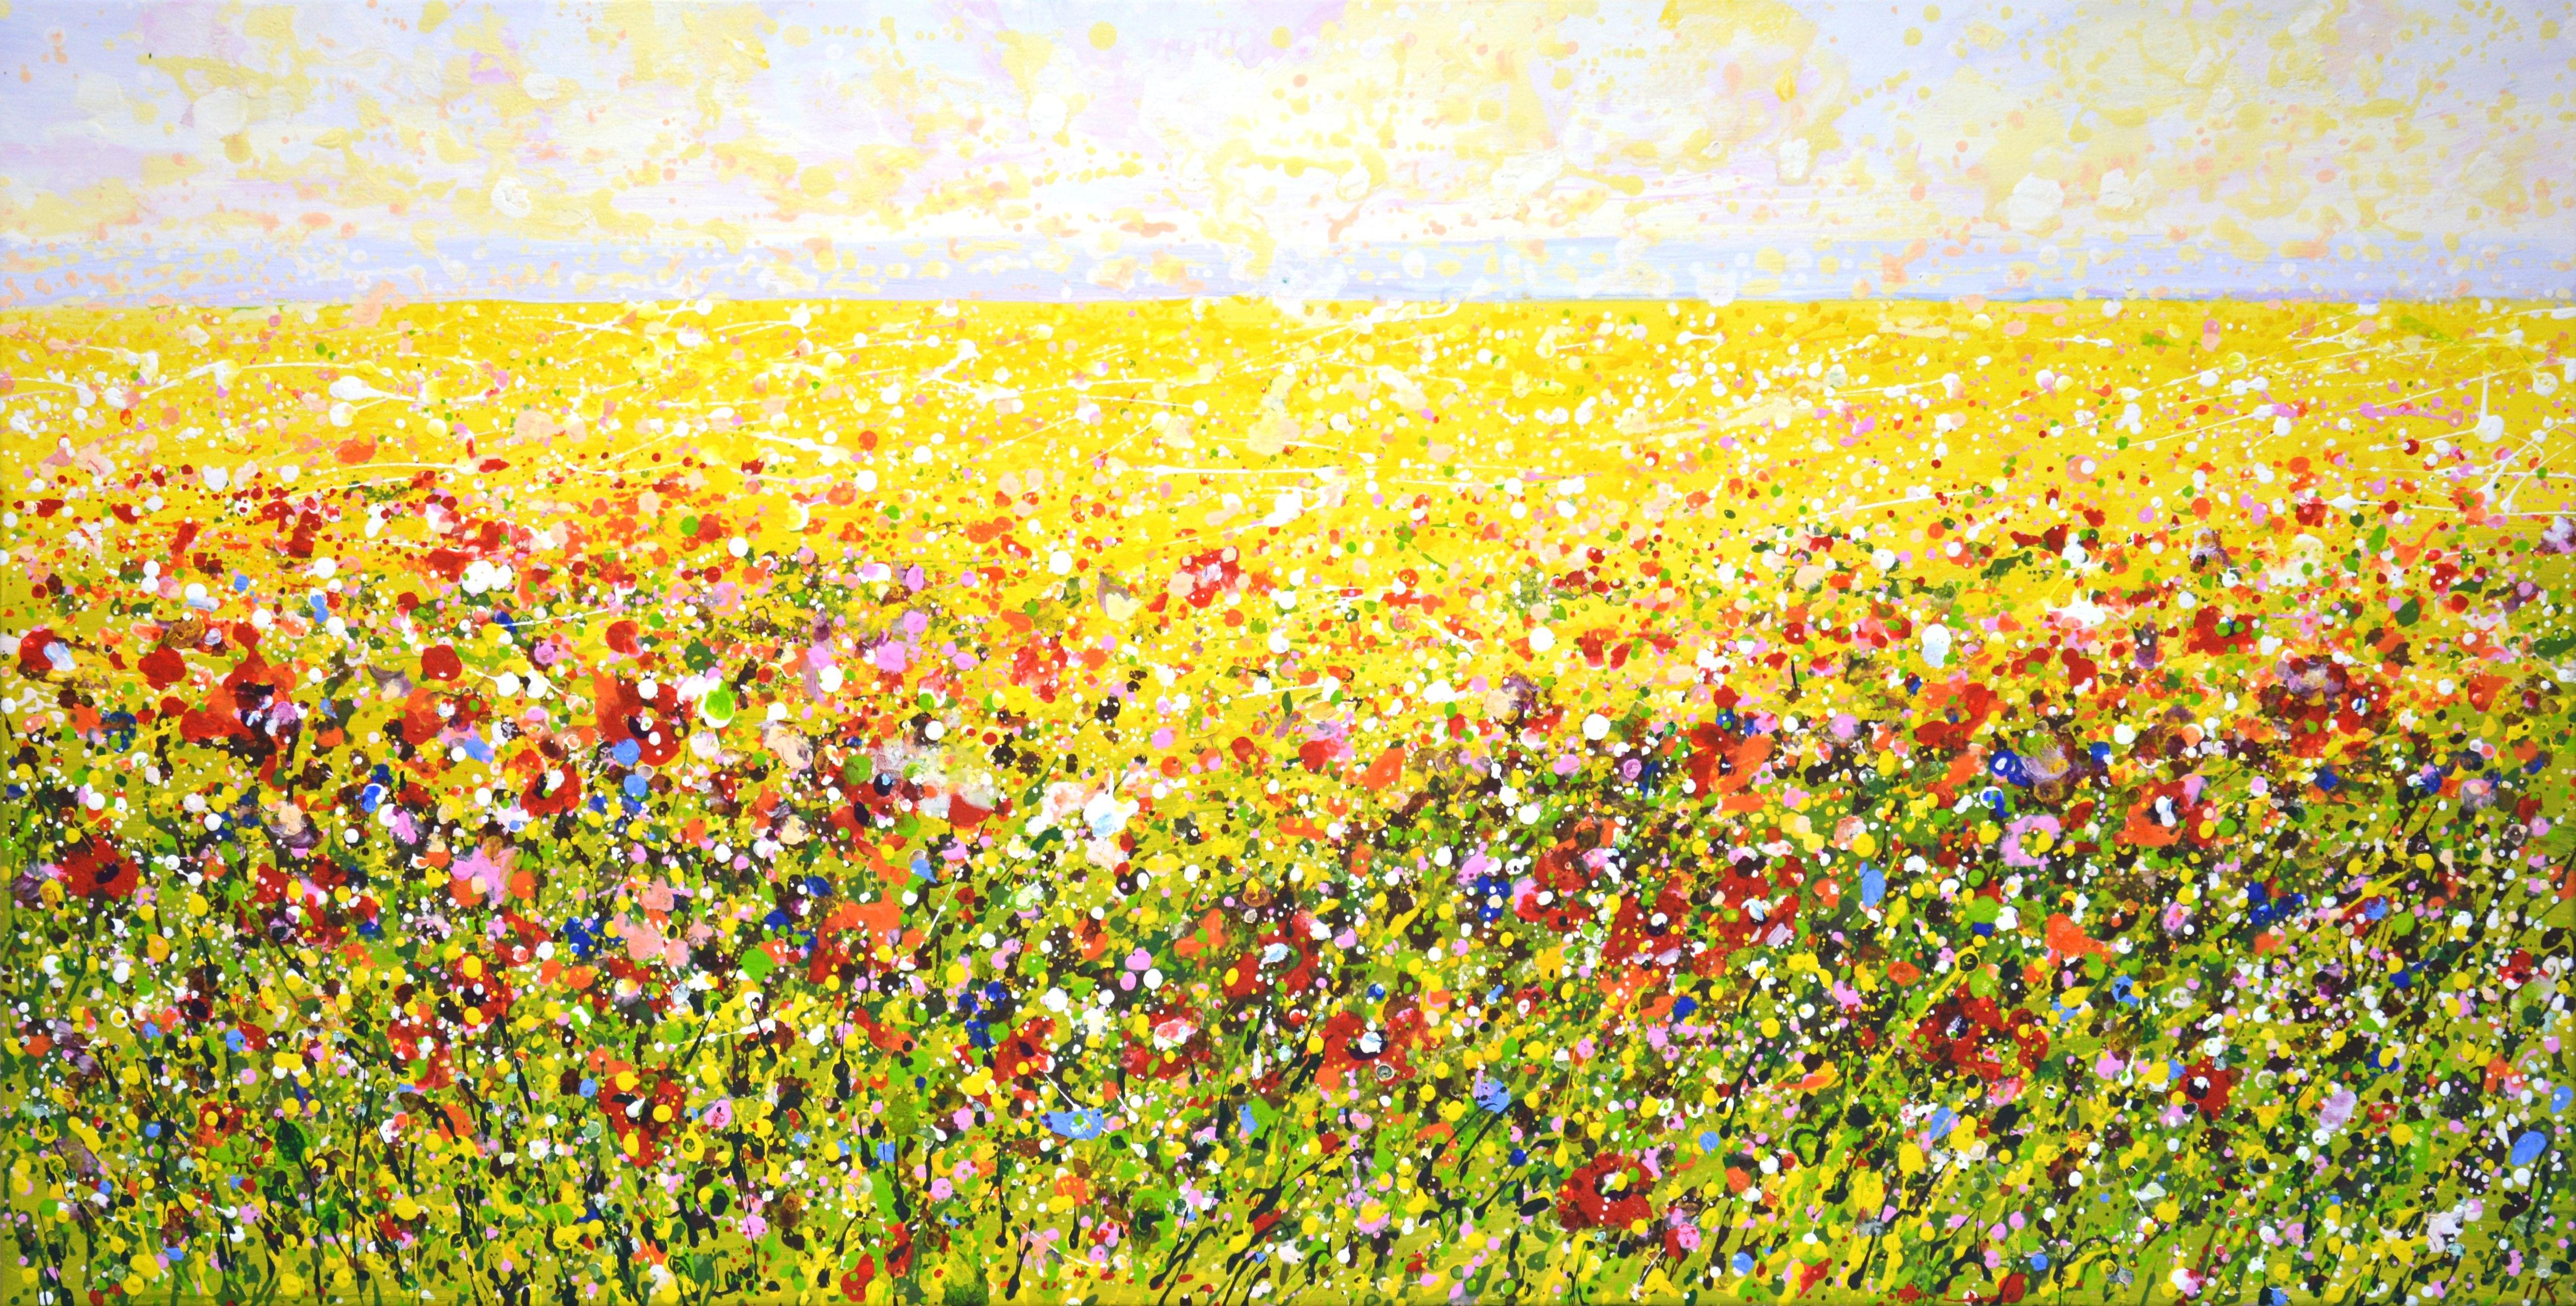 Flower field 5. Summer landscape: yellow field, poppies. A celebration of bright flowers and herbs on a summer day creates an atmosphere of relaxation, harmony and bliss. Abstract expressionism. The painting was painted using the technique of